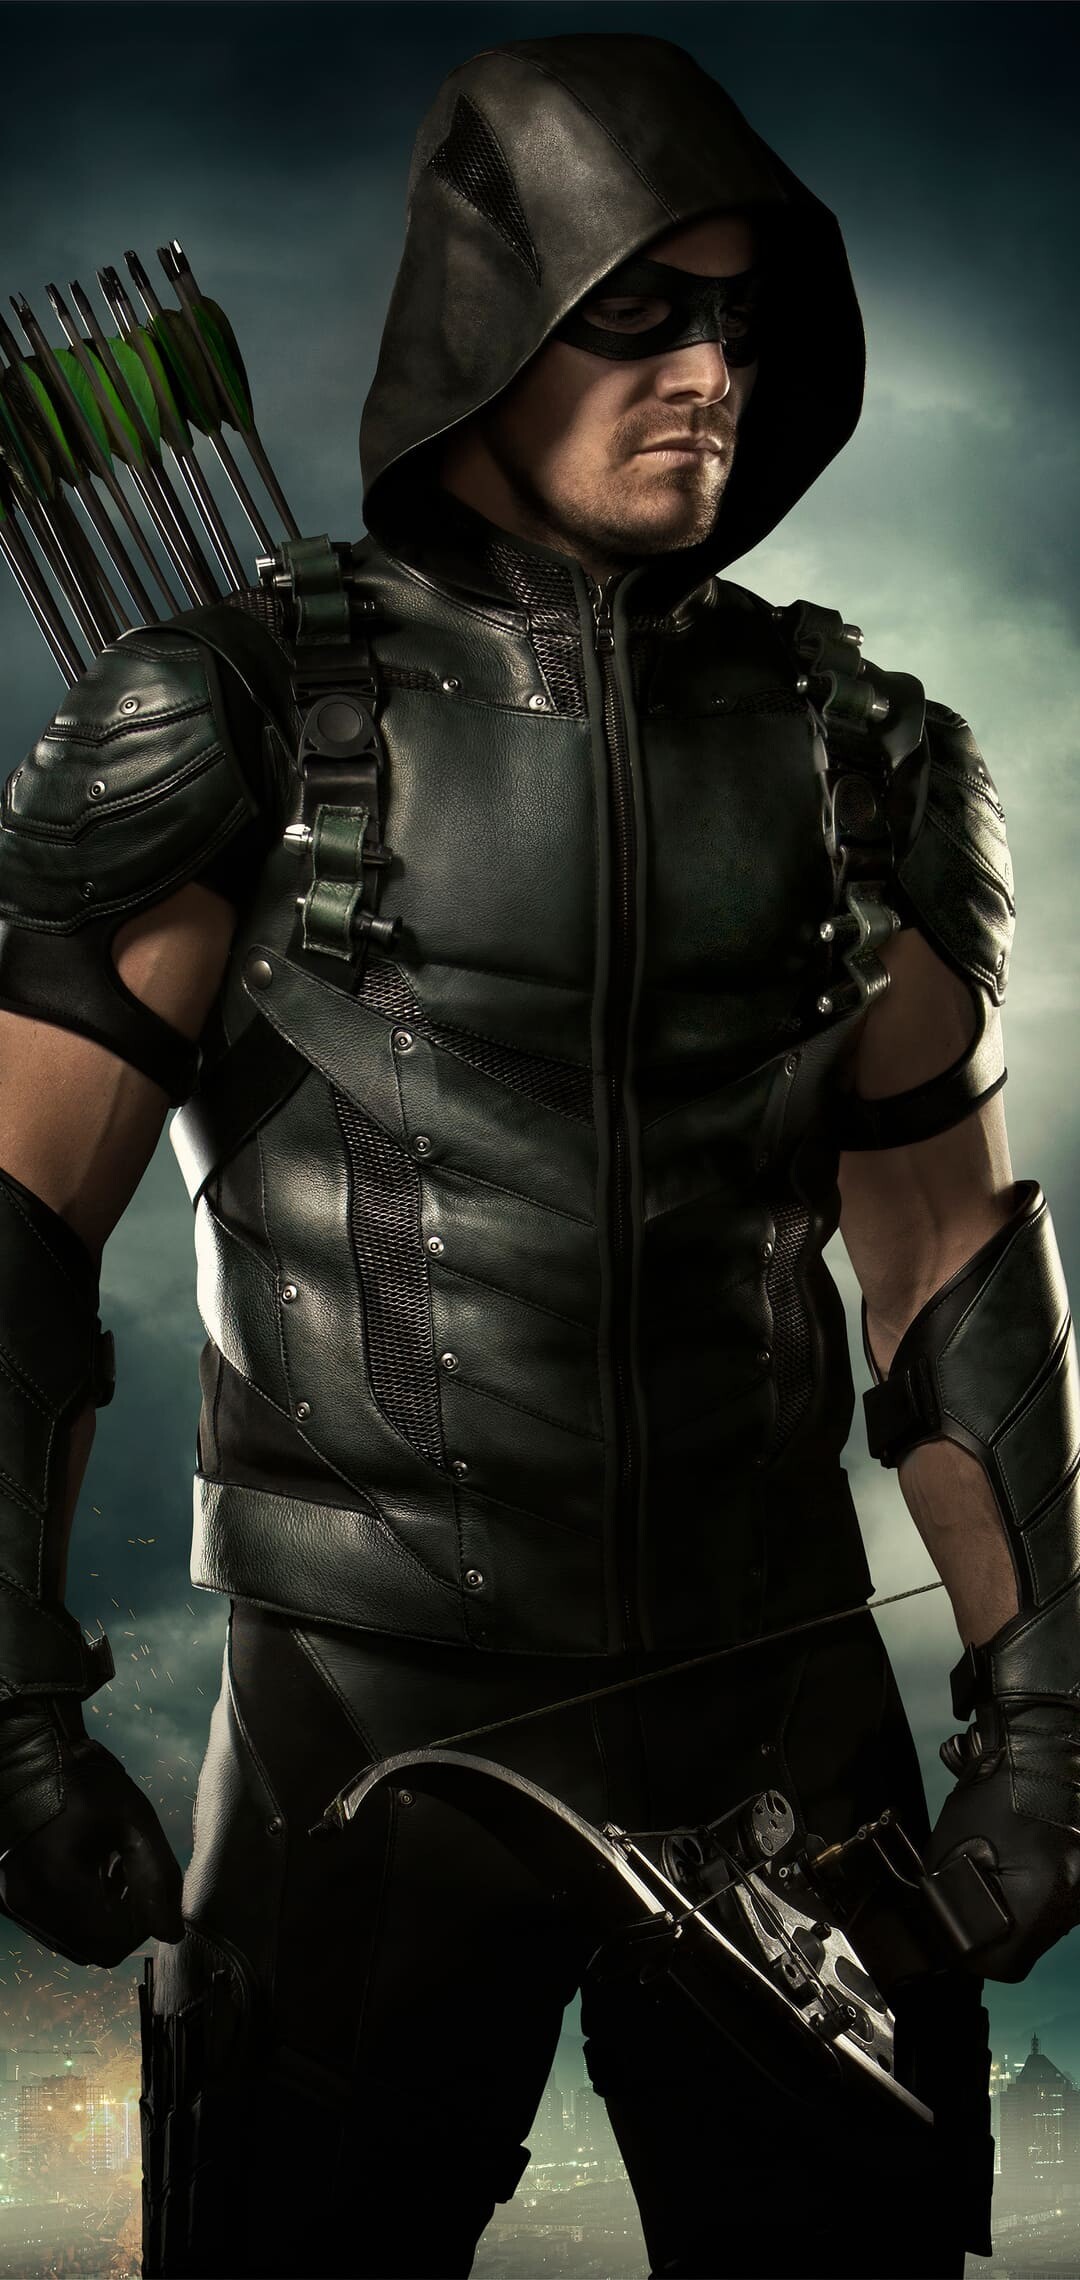 Green Arrow: A vigilante who uses a bow and arrows to fight crime at a street level. 1080x2280 HD Wallpaper.